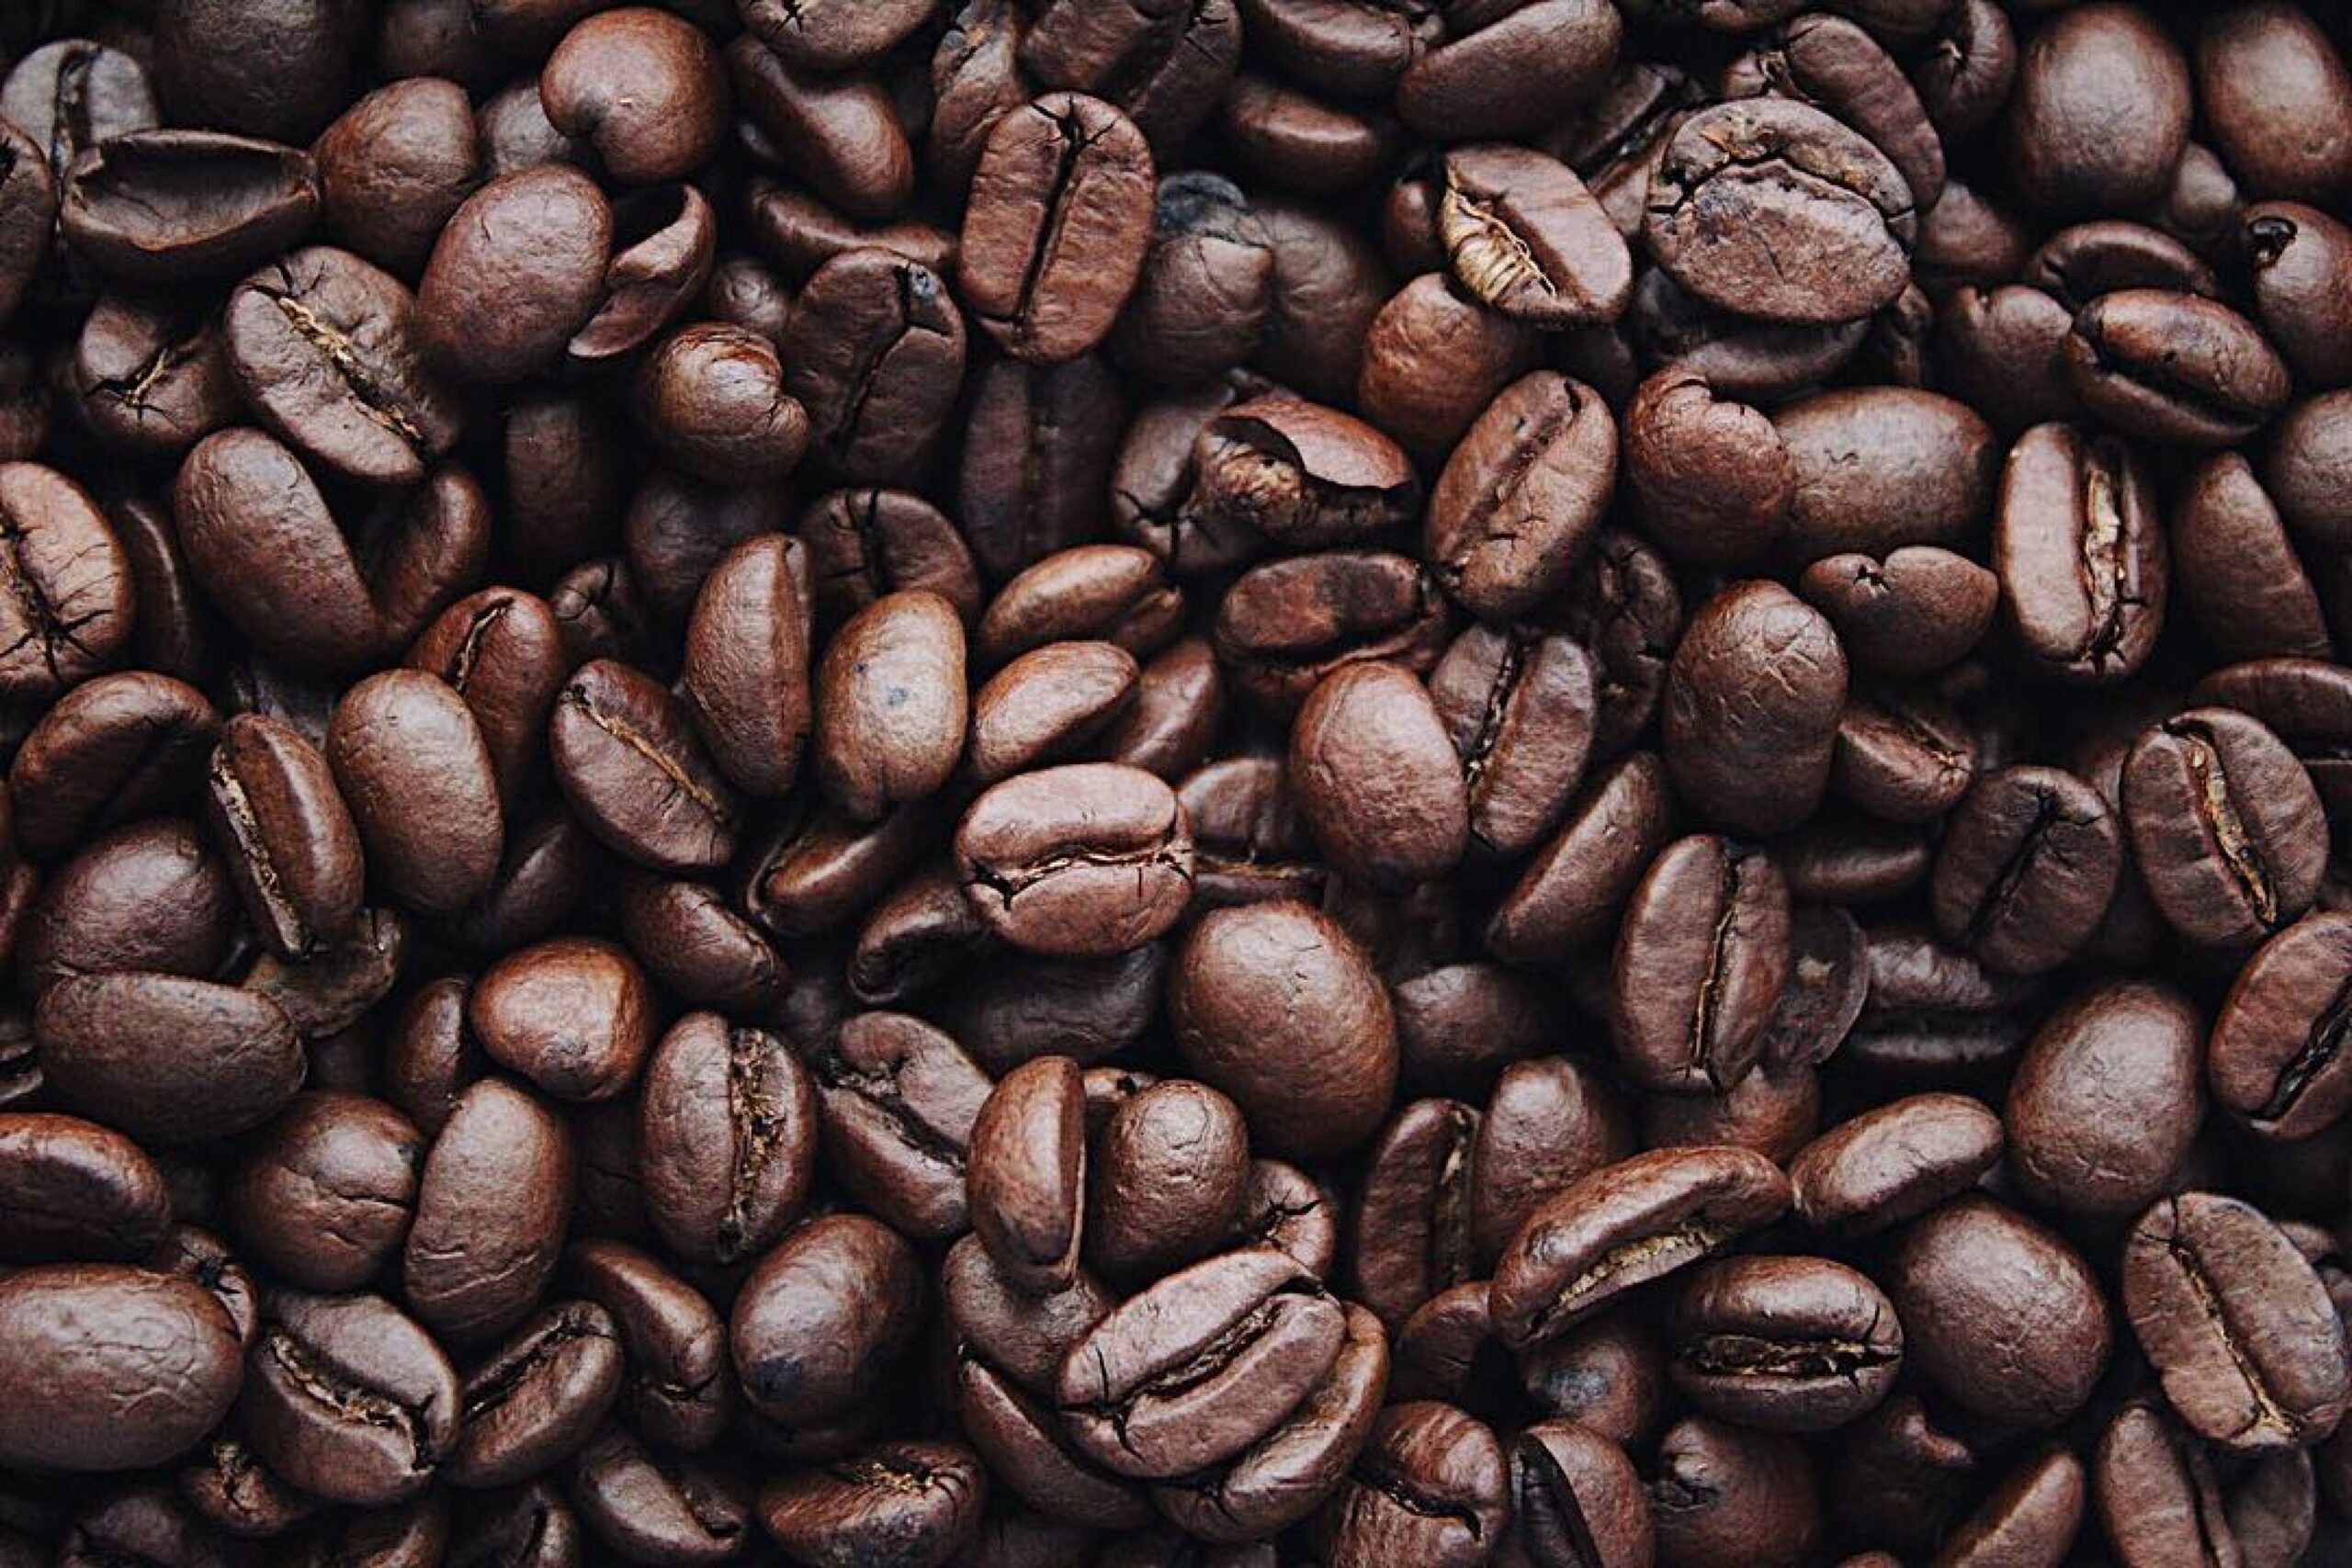 The Surprising Health Benefits and Risks of Drinking Coffee